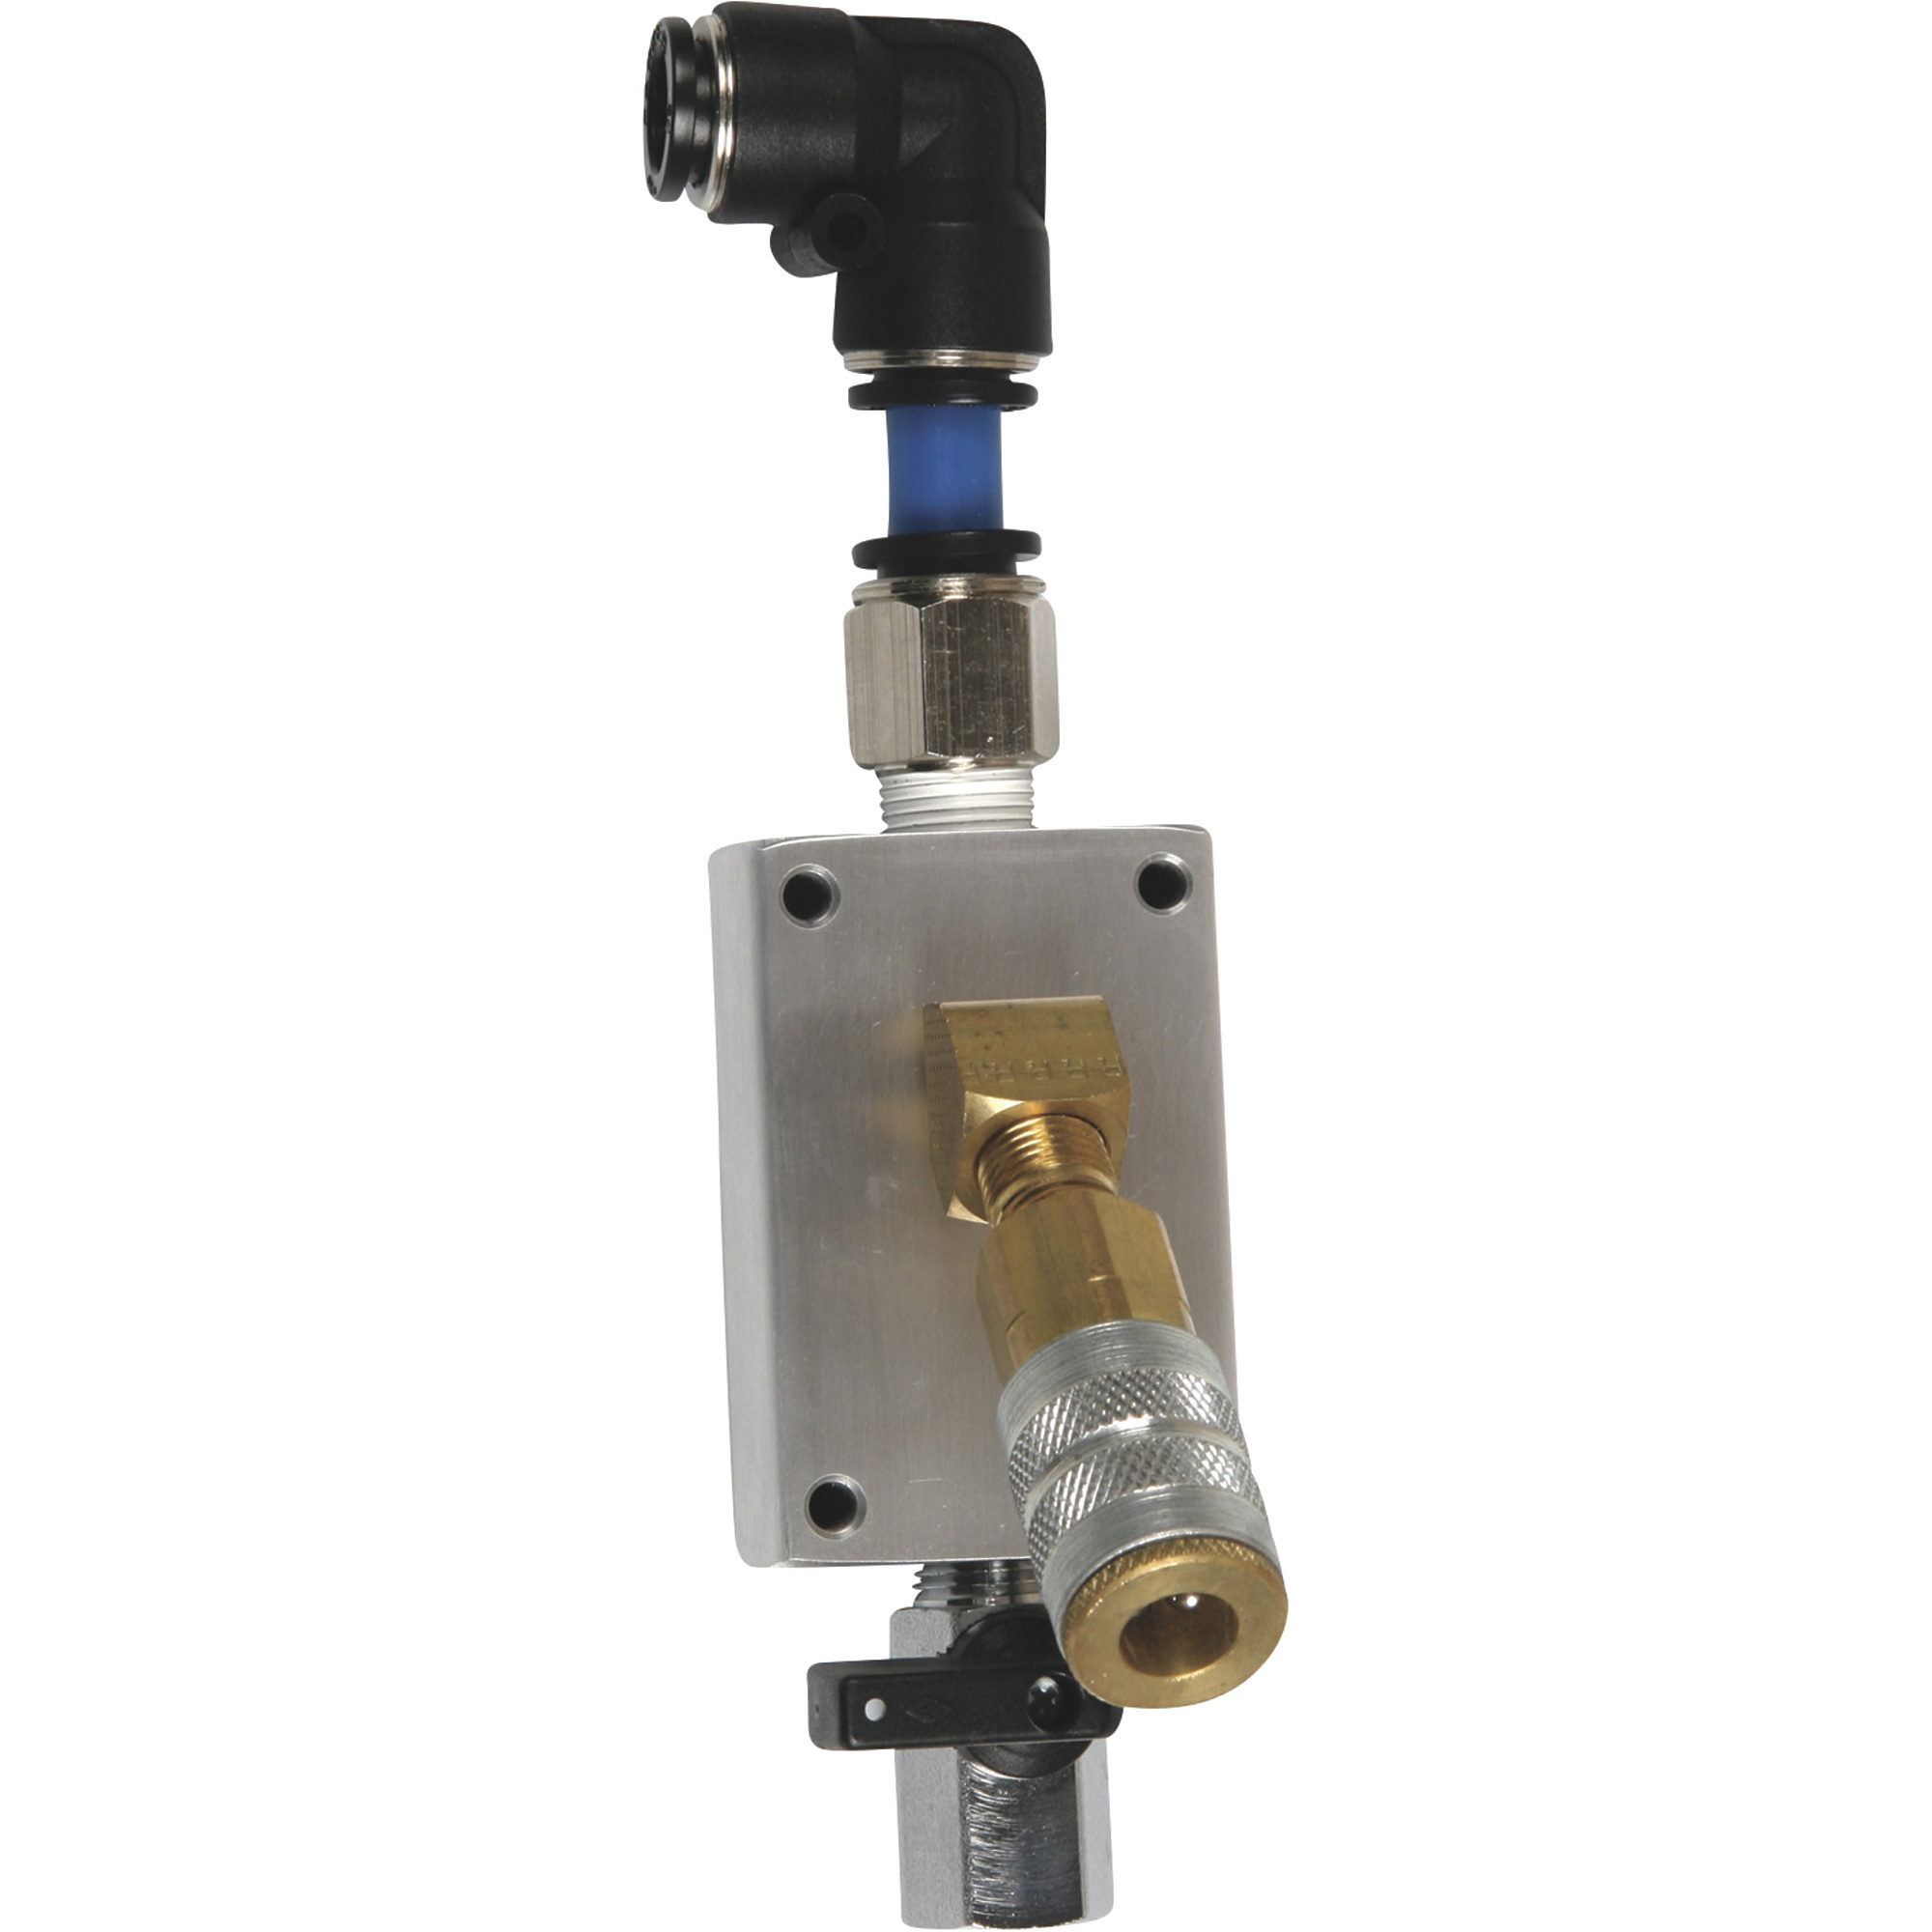 RapidAir 1/2Inch Compressed Air Outlet, Model 90100